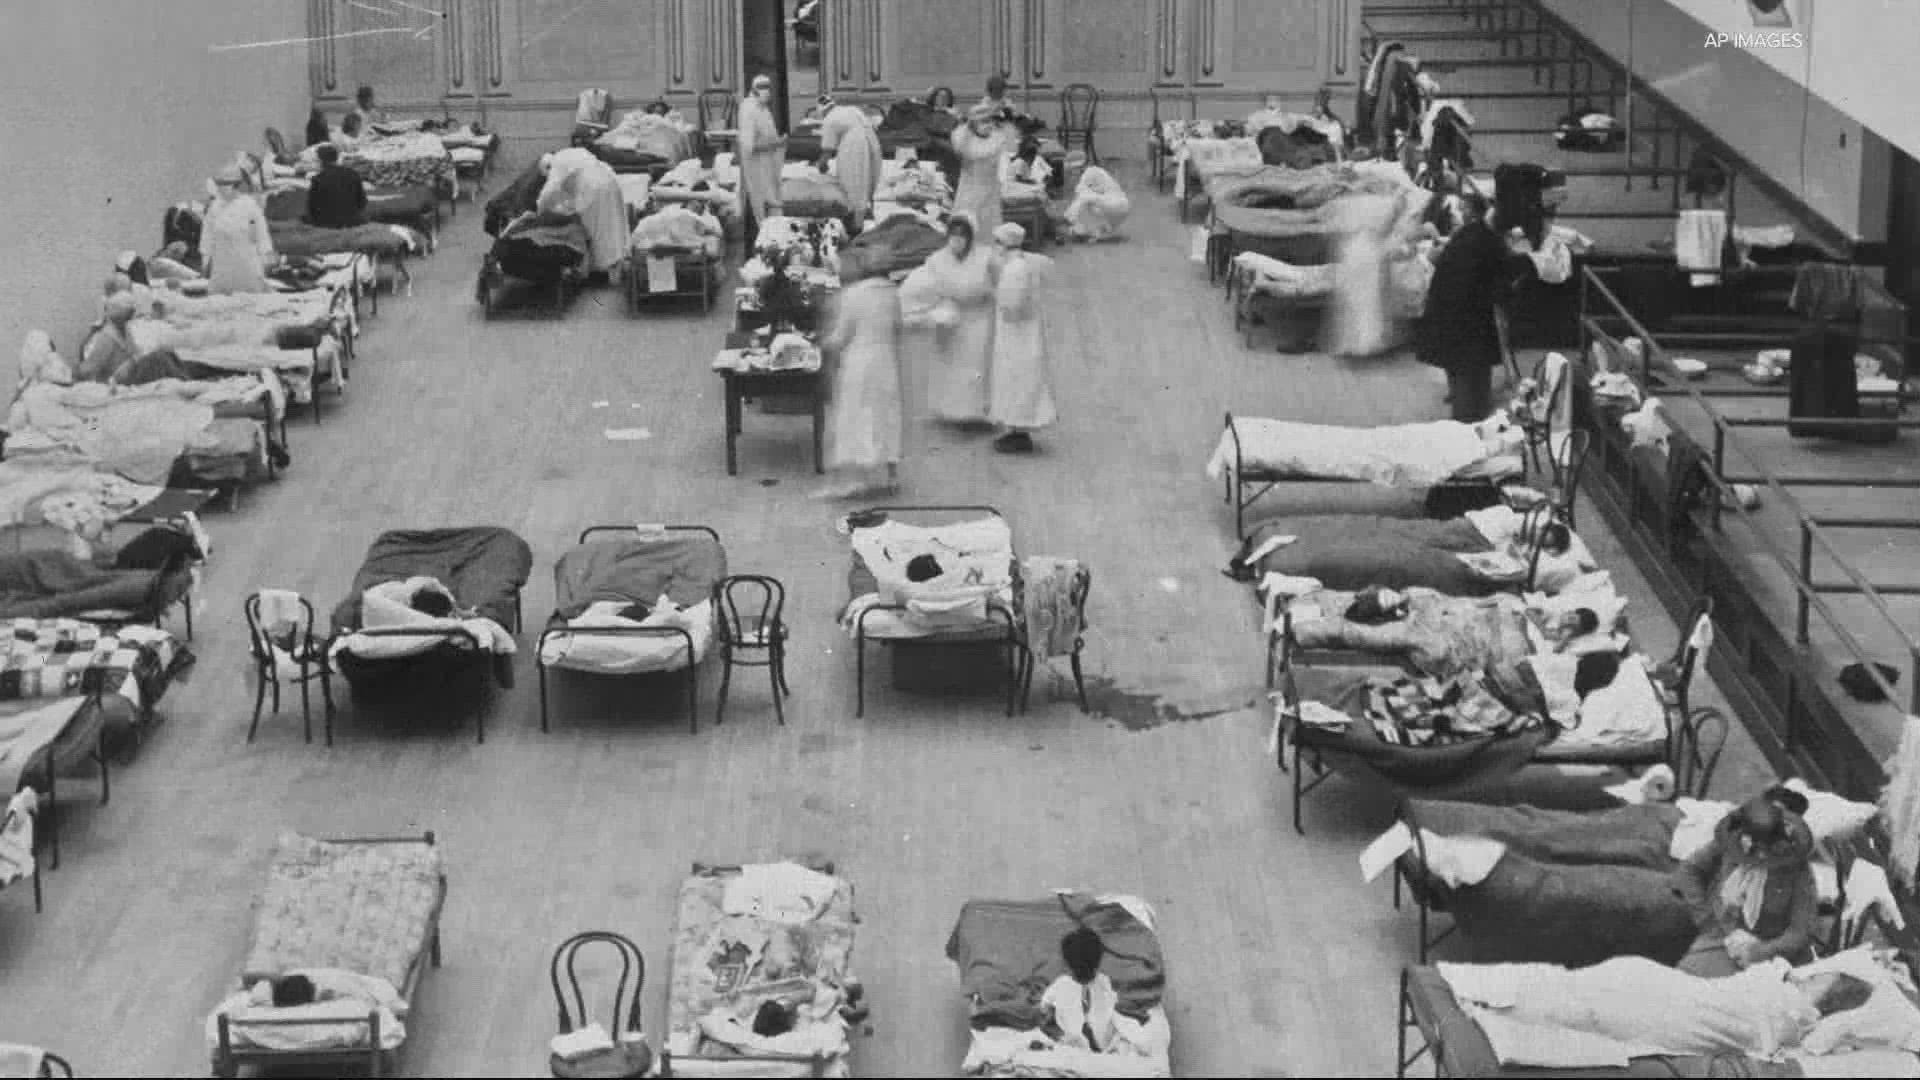 A team of health and history experts recently published an article that compares the 1918 flu pandemic to the current COVID pandemic.